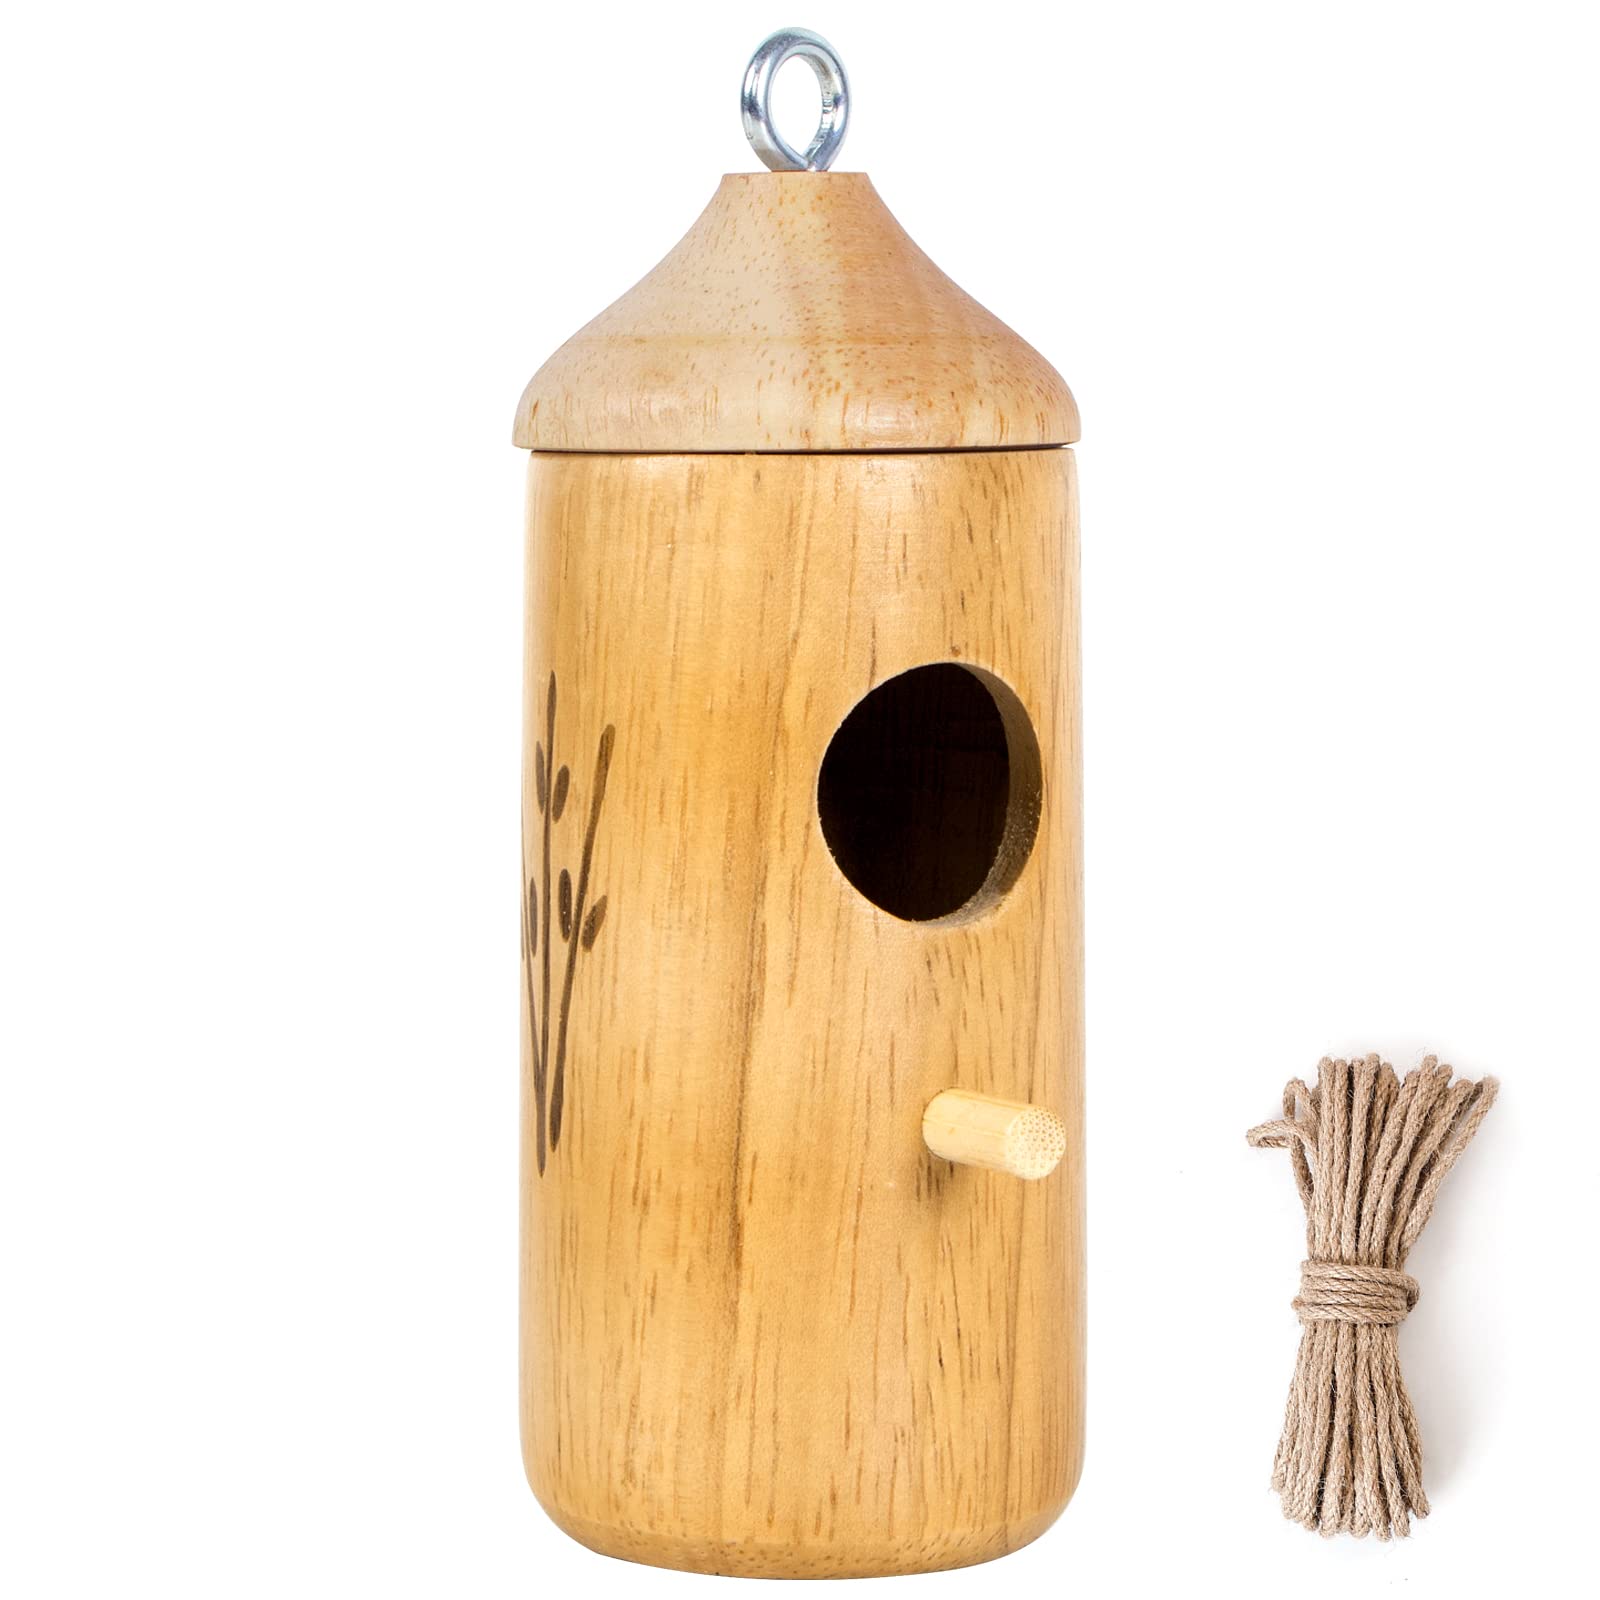 Kmise Hummingbird House For Outside Hanging,Wooden Humming Bird Nest With Hemp Ropes (Rectangle 1 Piece)